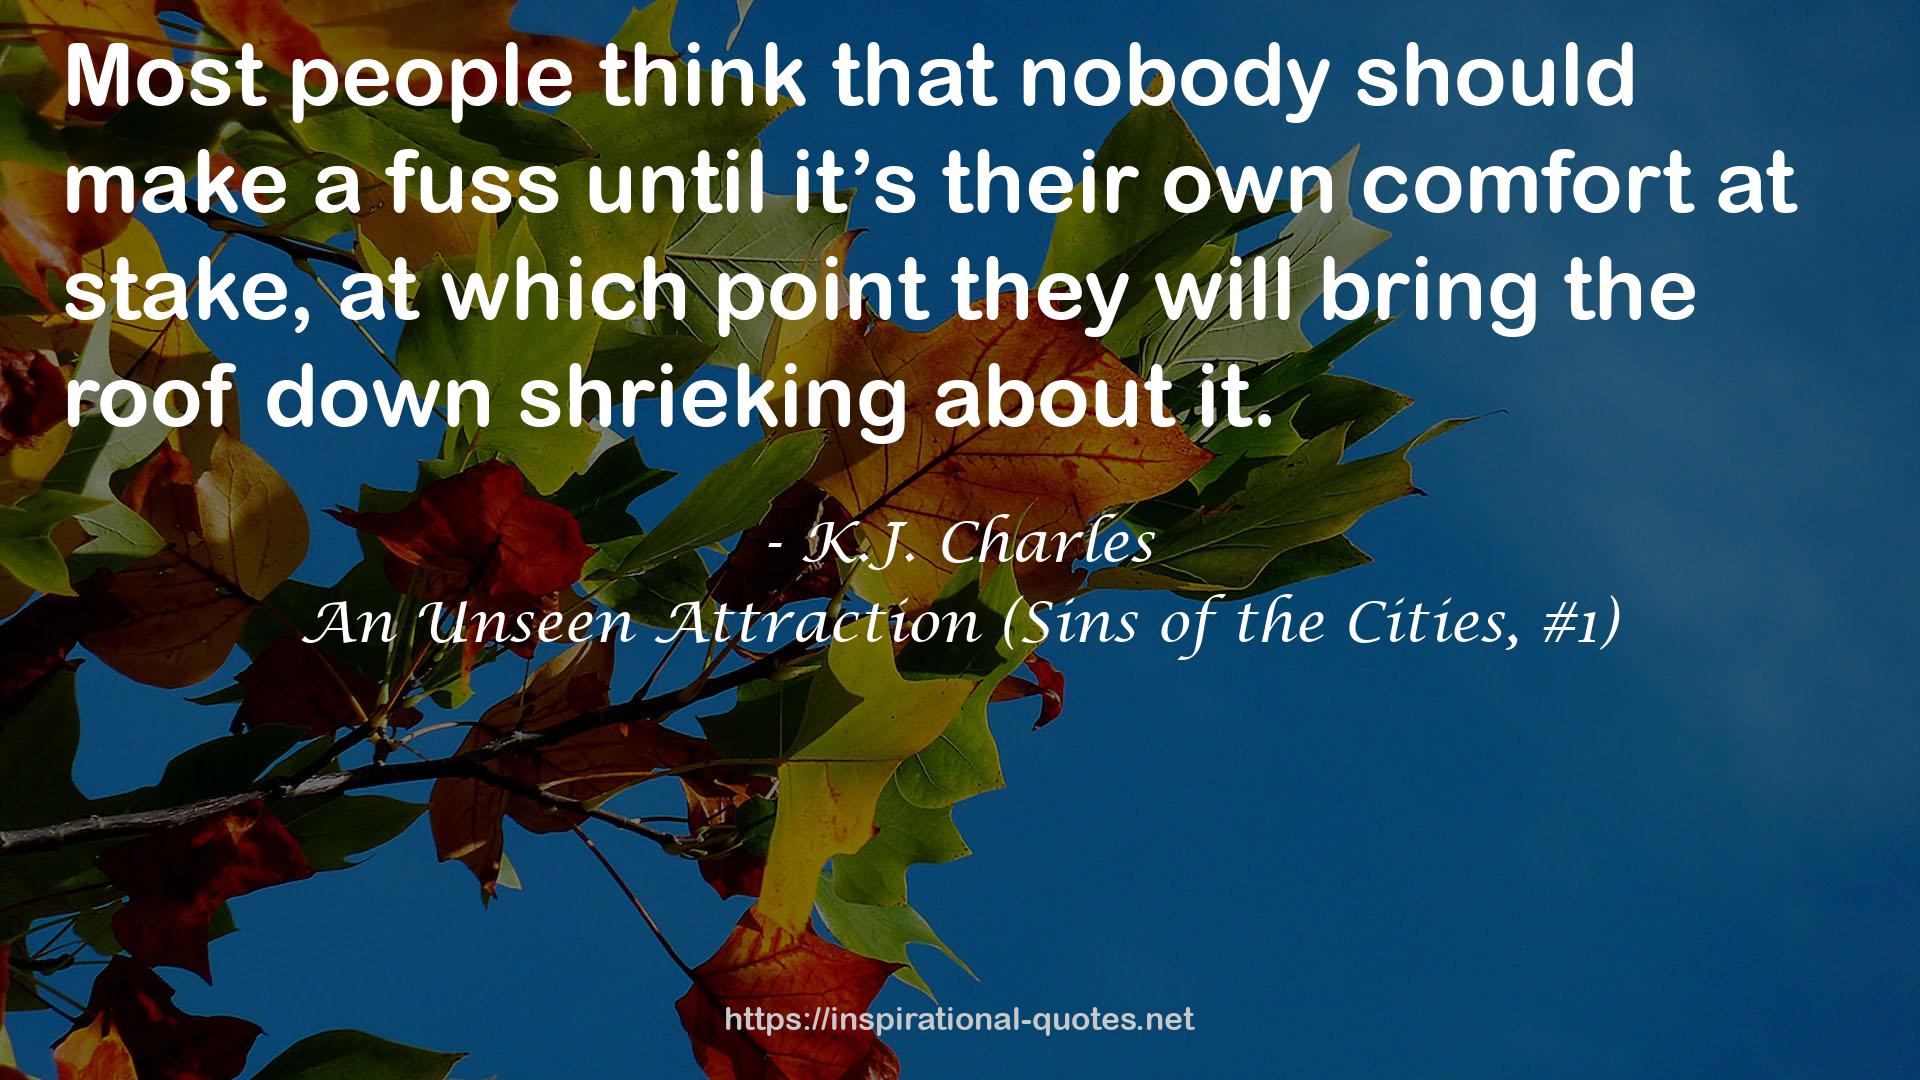 An Unseen Attraction (Sins of the Cities, #1) QUOTES